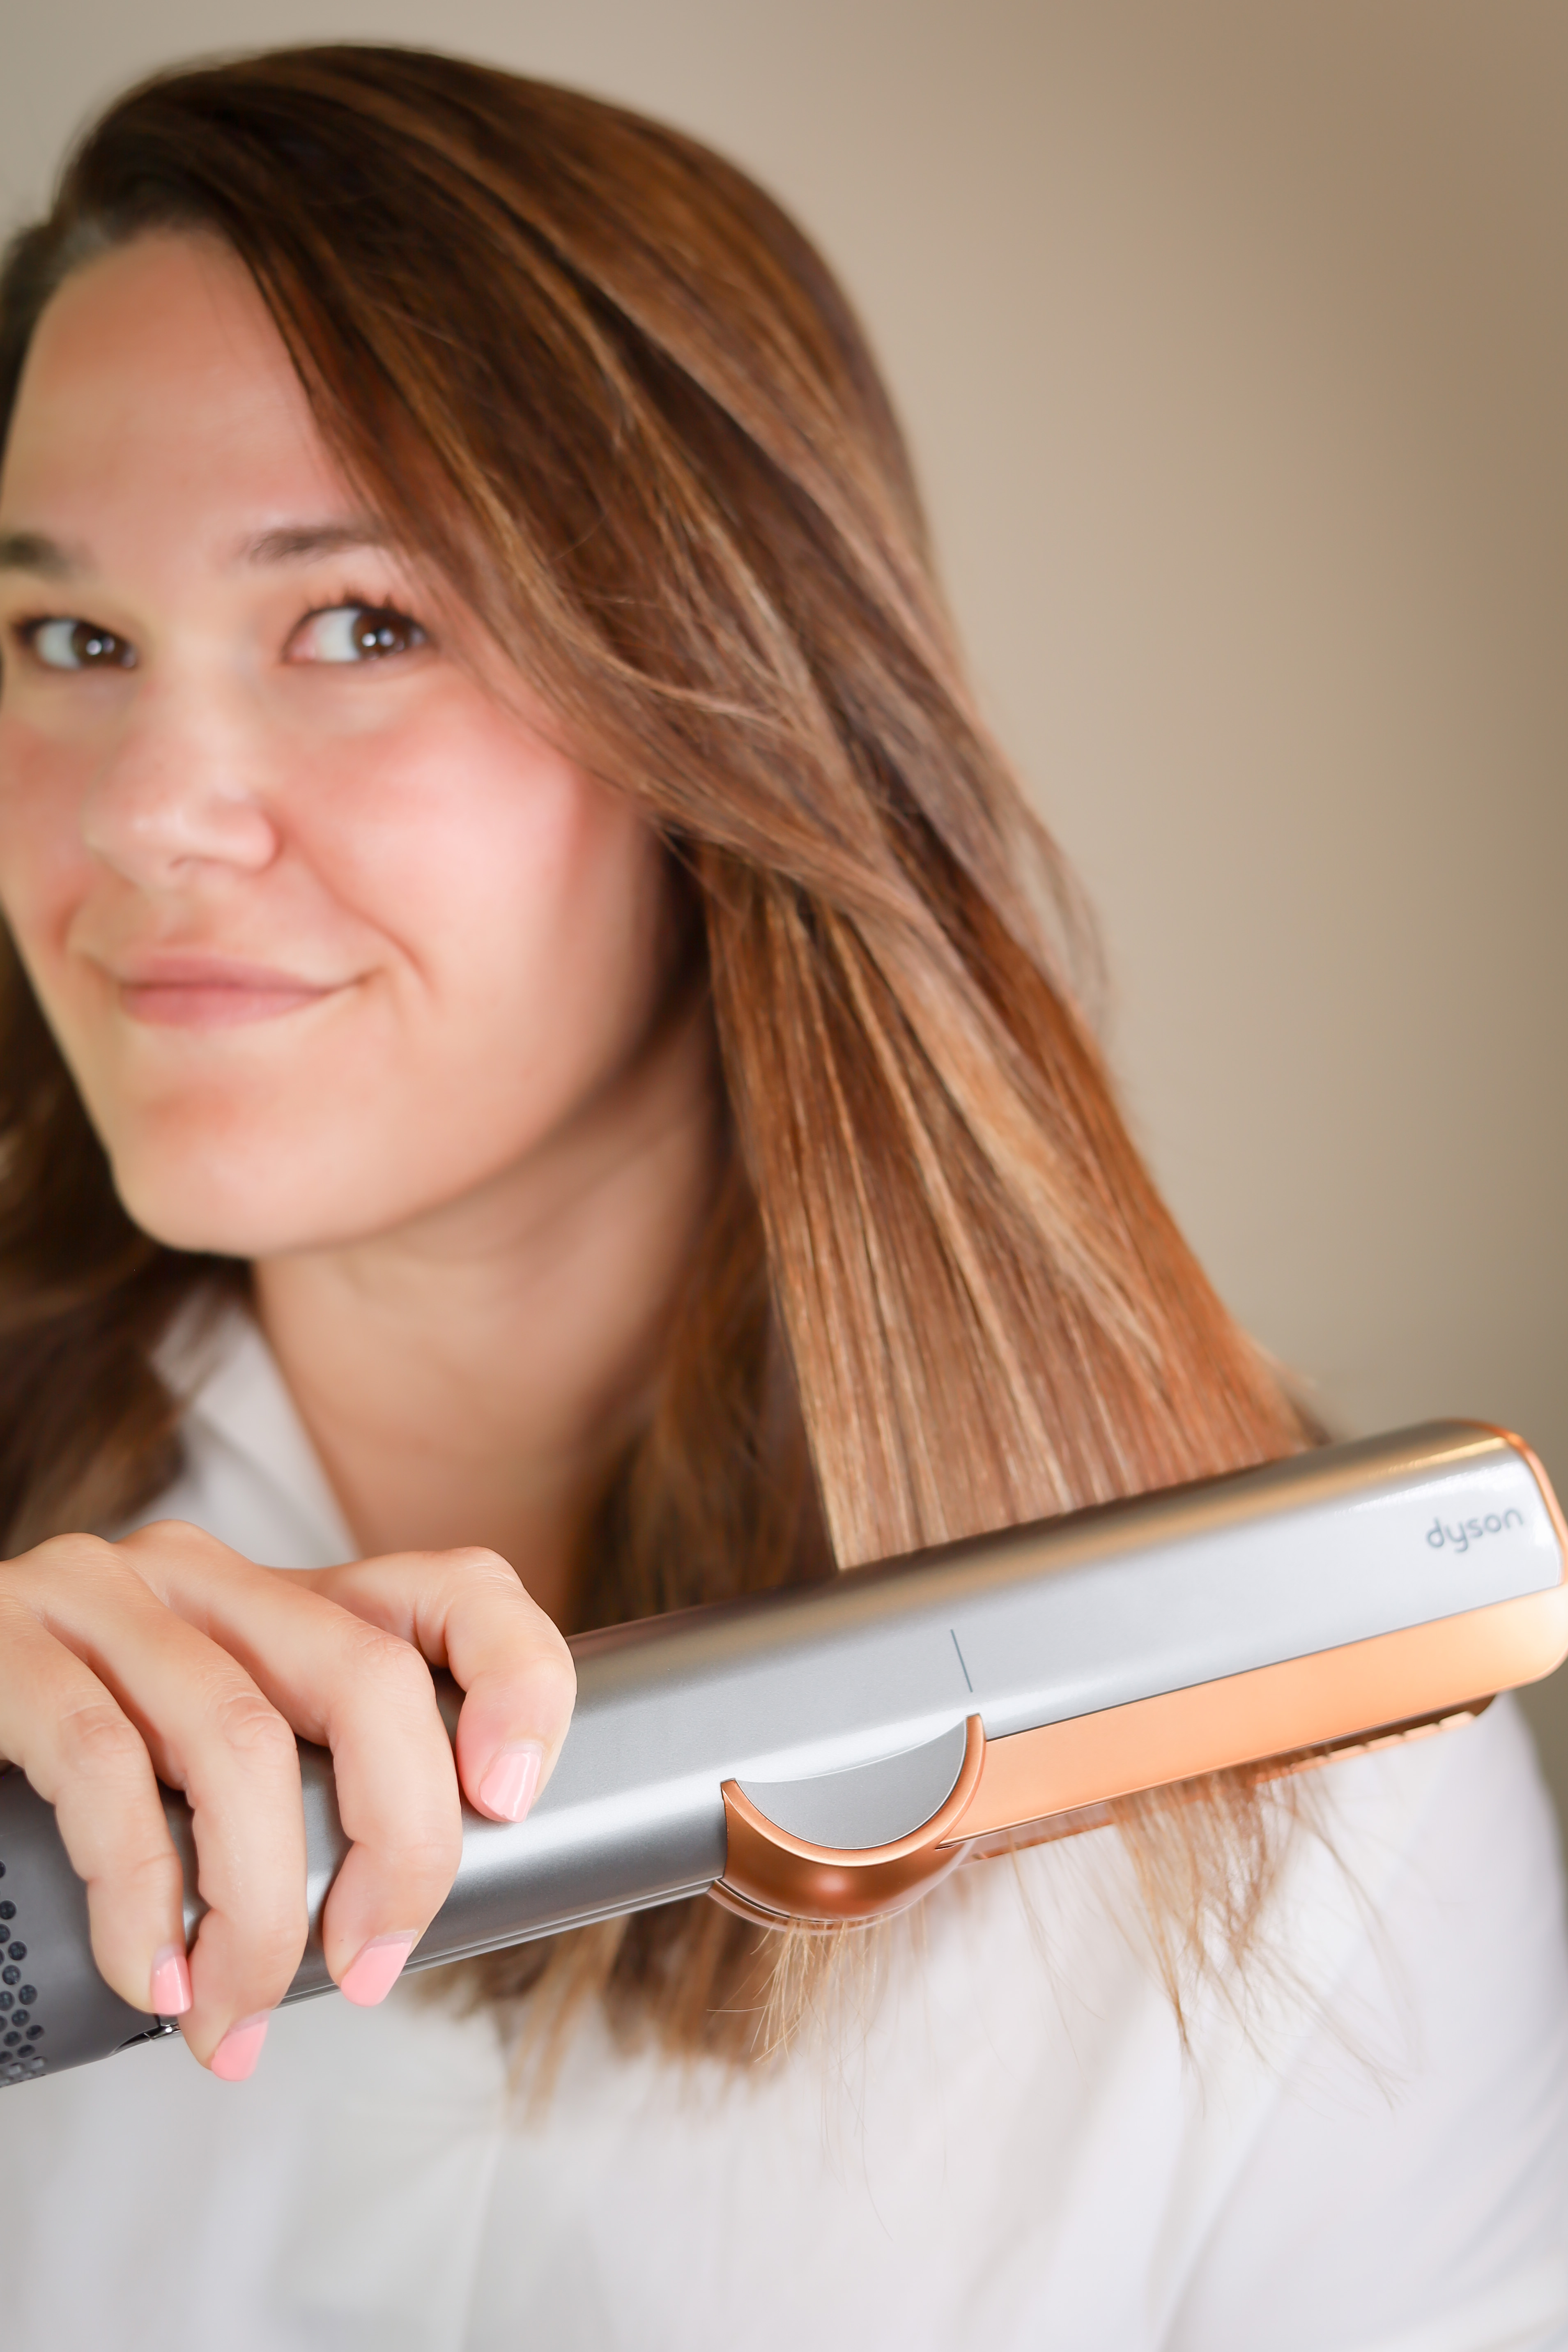 Dyson Airstrait: A new breed of flat iron